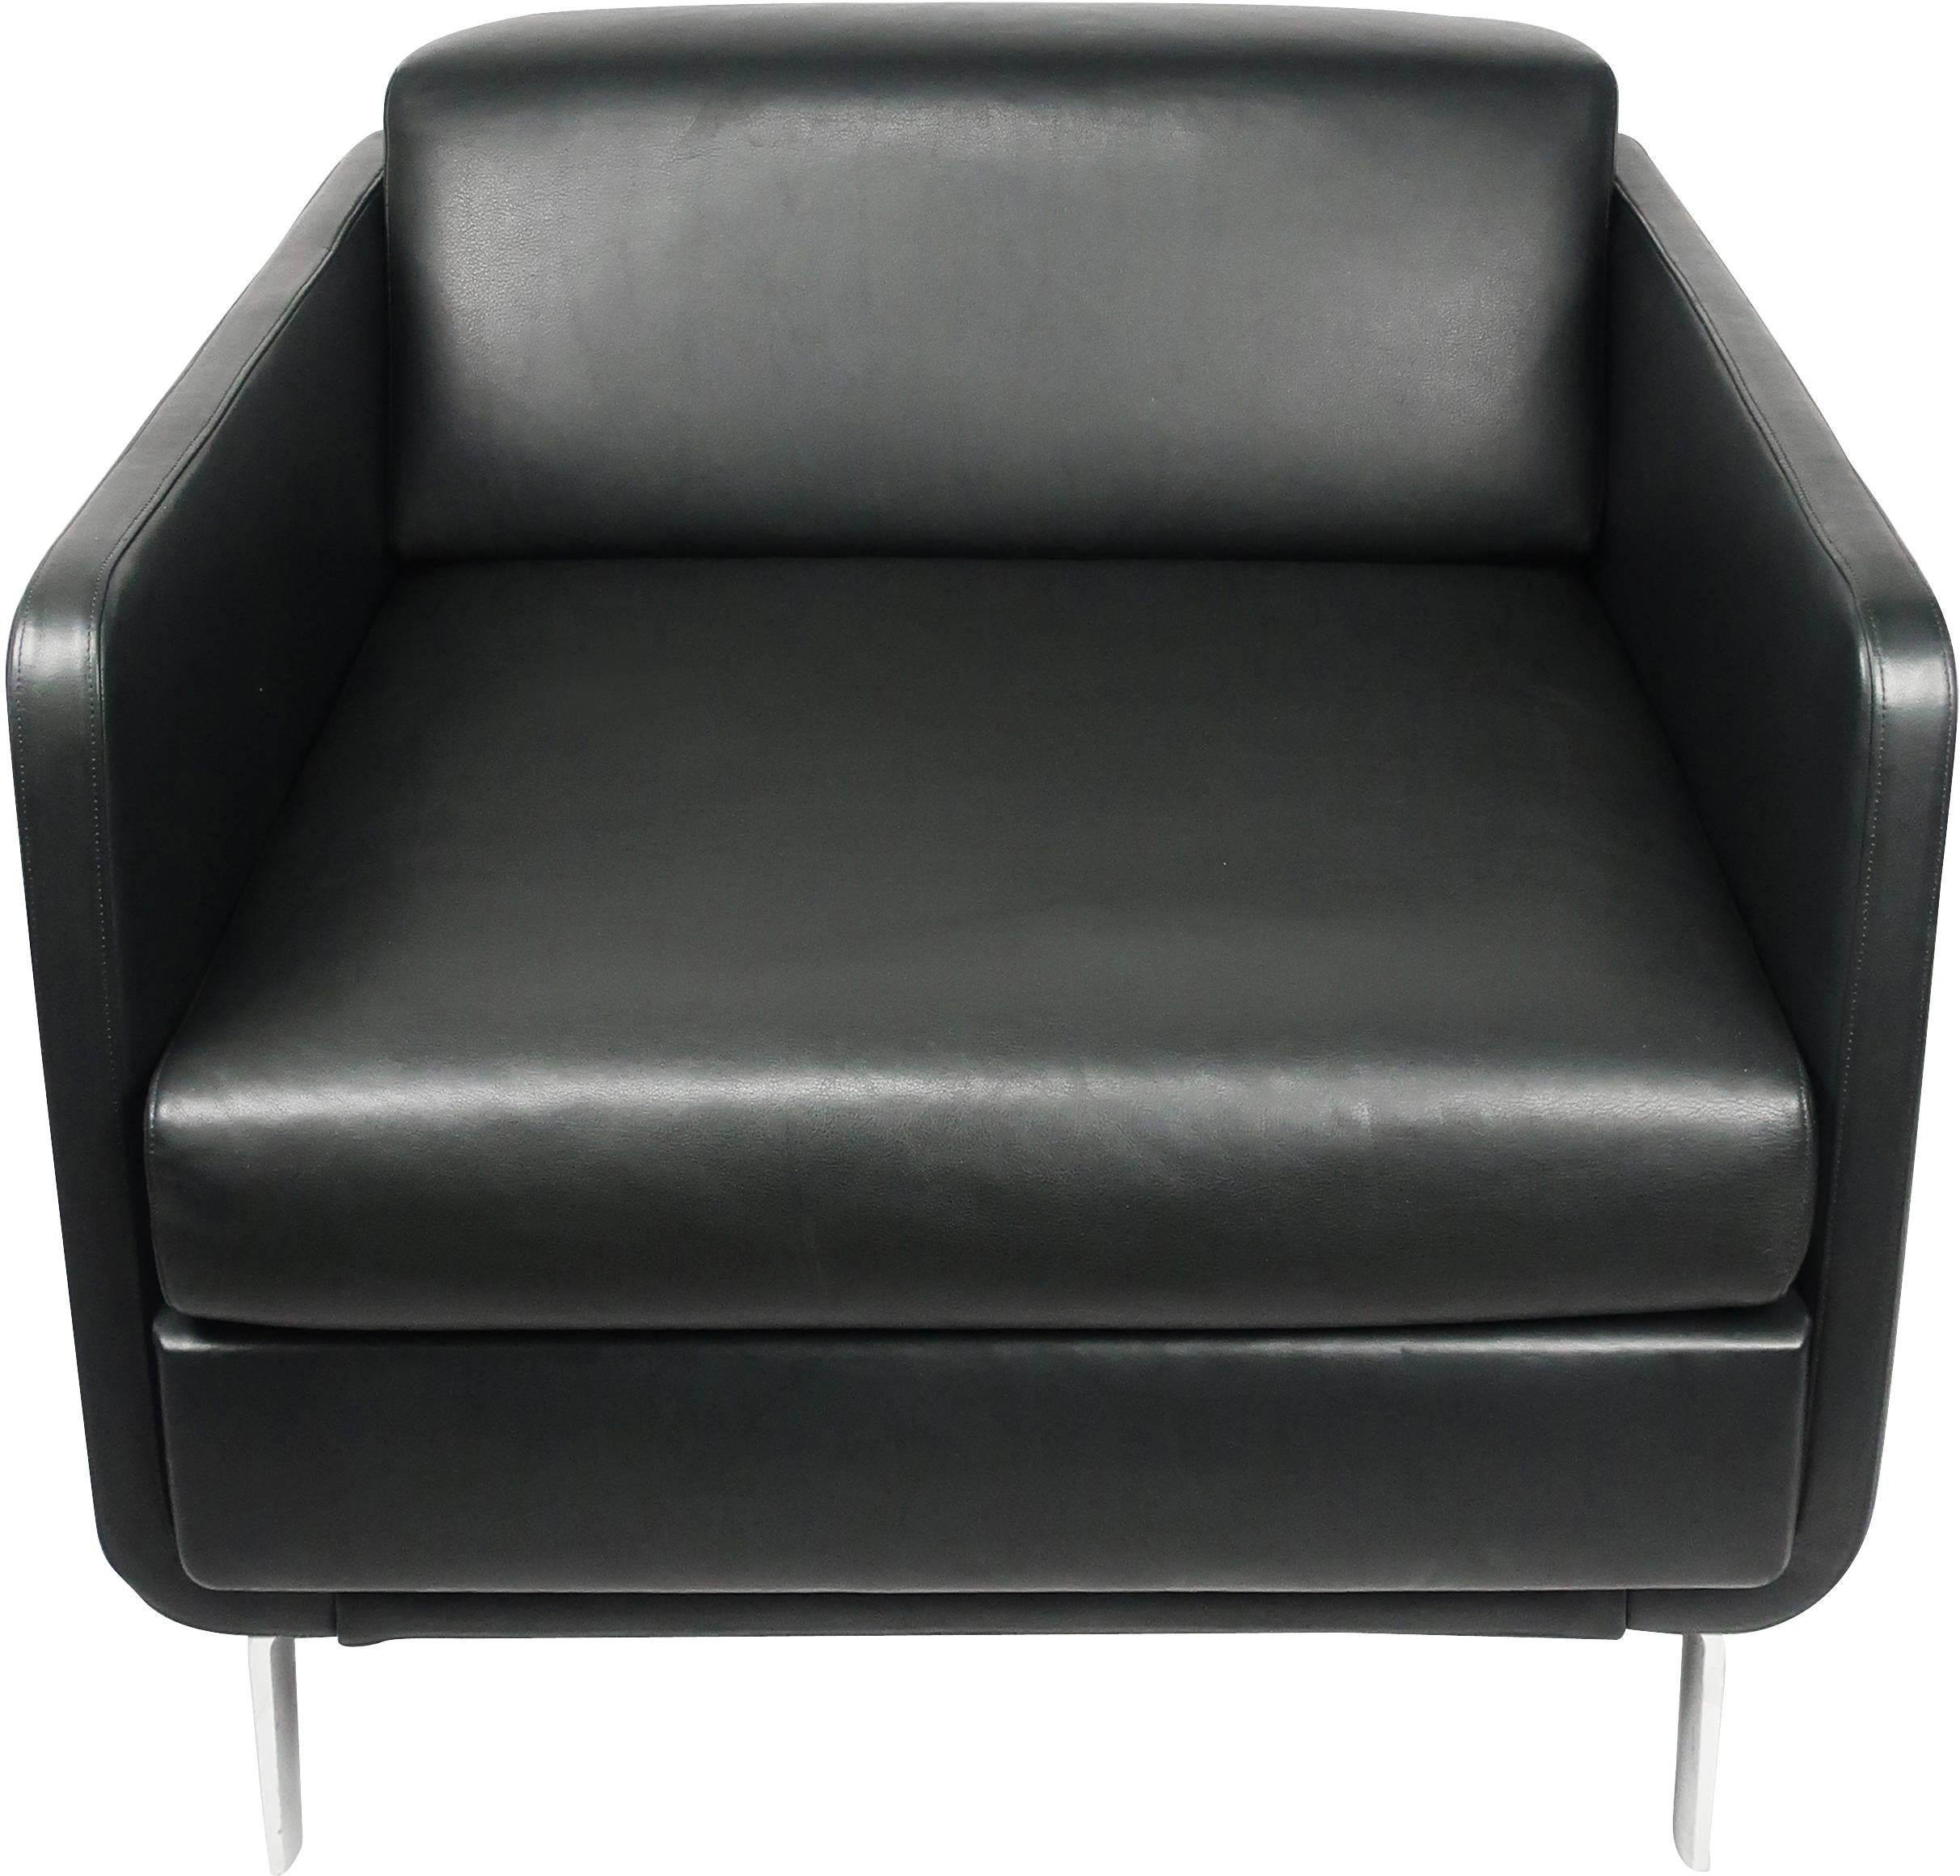 Designed by Arik Levy for Bernhardt Design with a wide seat, thin arms, and chrome legs, the Gaia 2202 arm chair is sophisticated, stylish, and comfortable. This black leather version was produced in 2010 and remains in great shape! 
 
 An Israeli